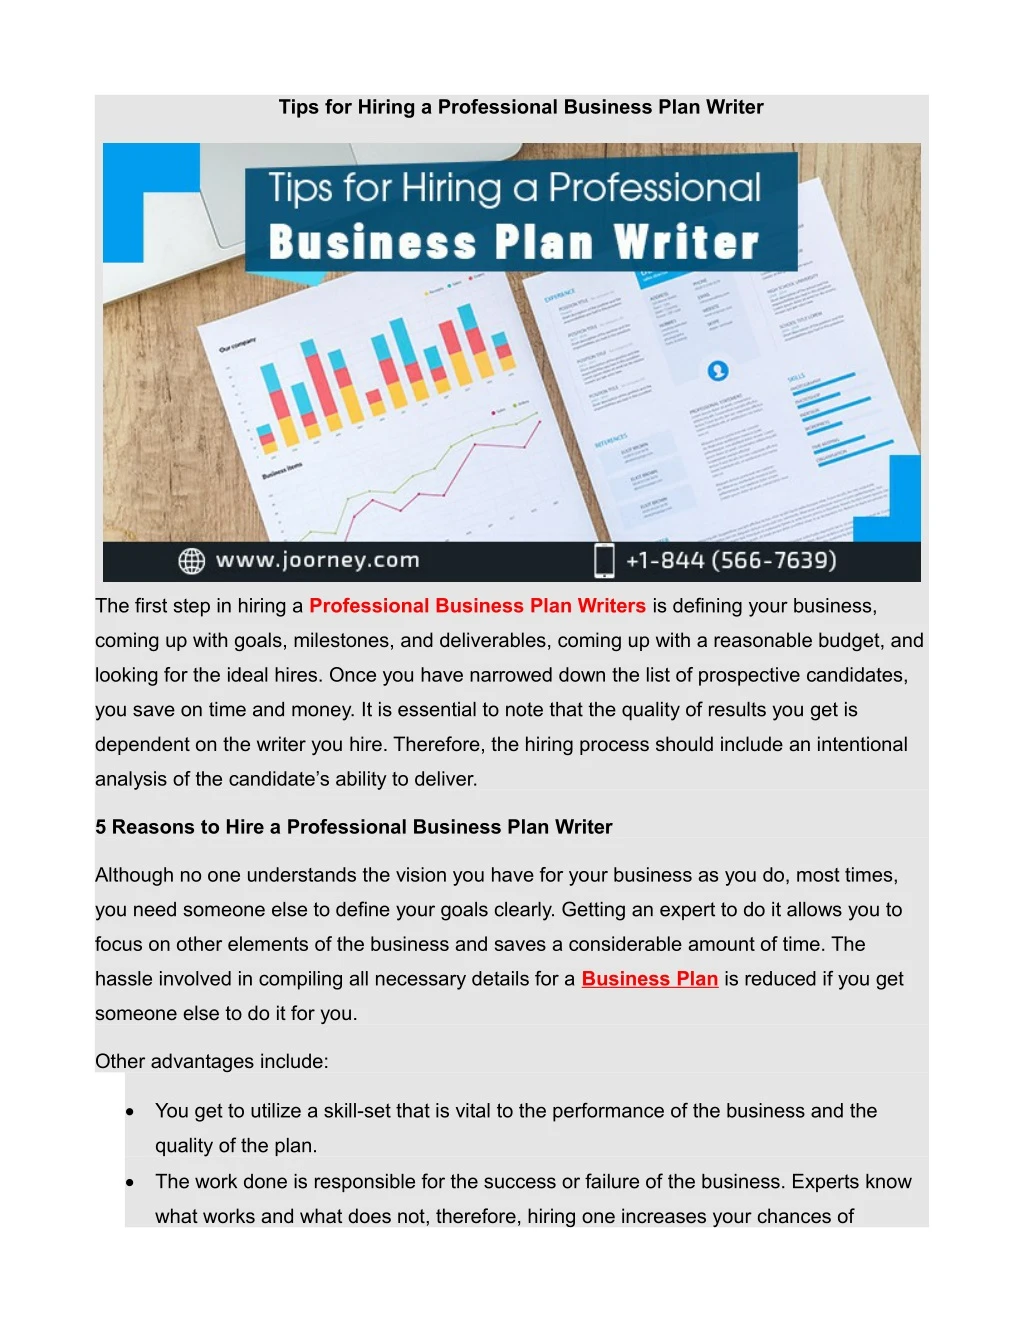 tips for hiring a professional business plan